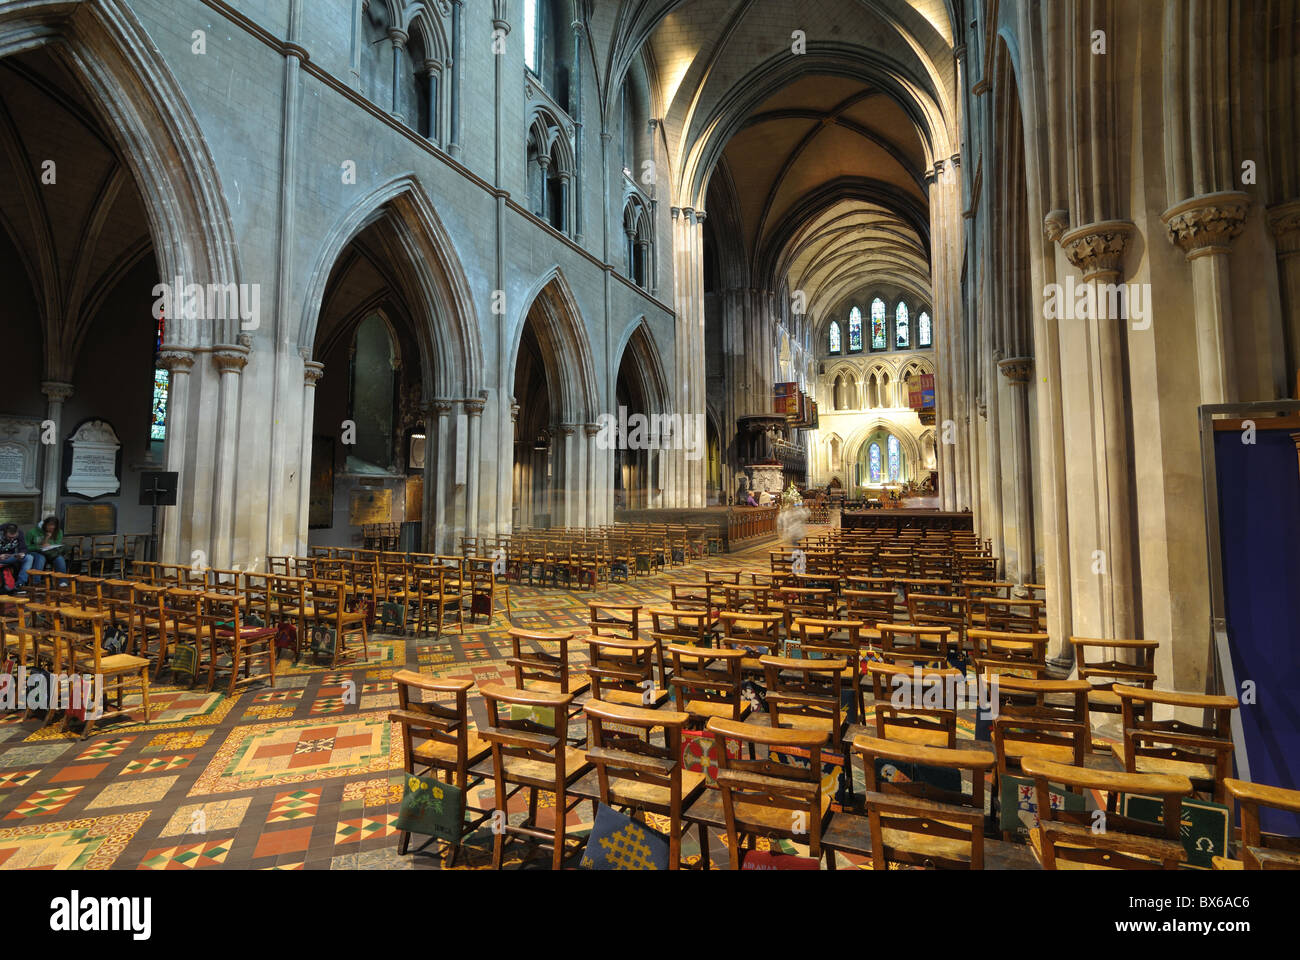 St. Patrick's Cathedral in Dublin, Ireland. Stock Photo